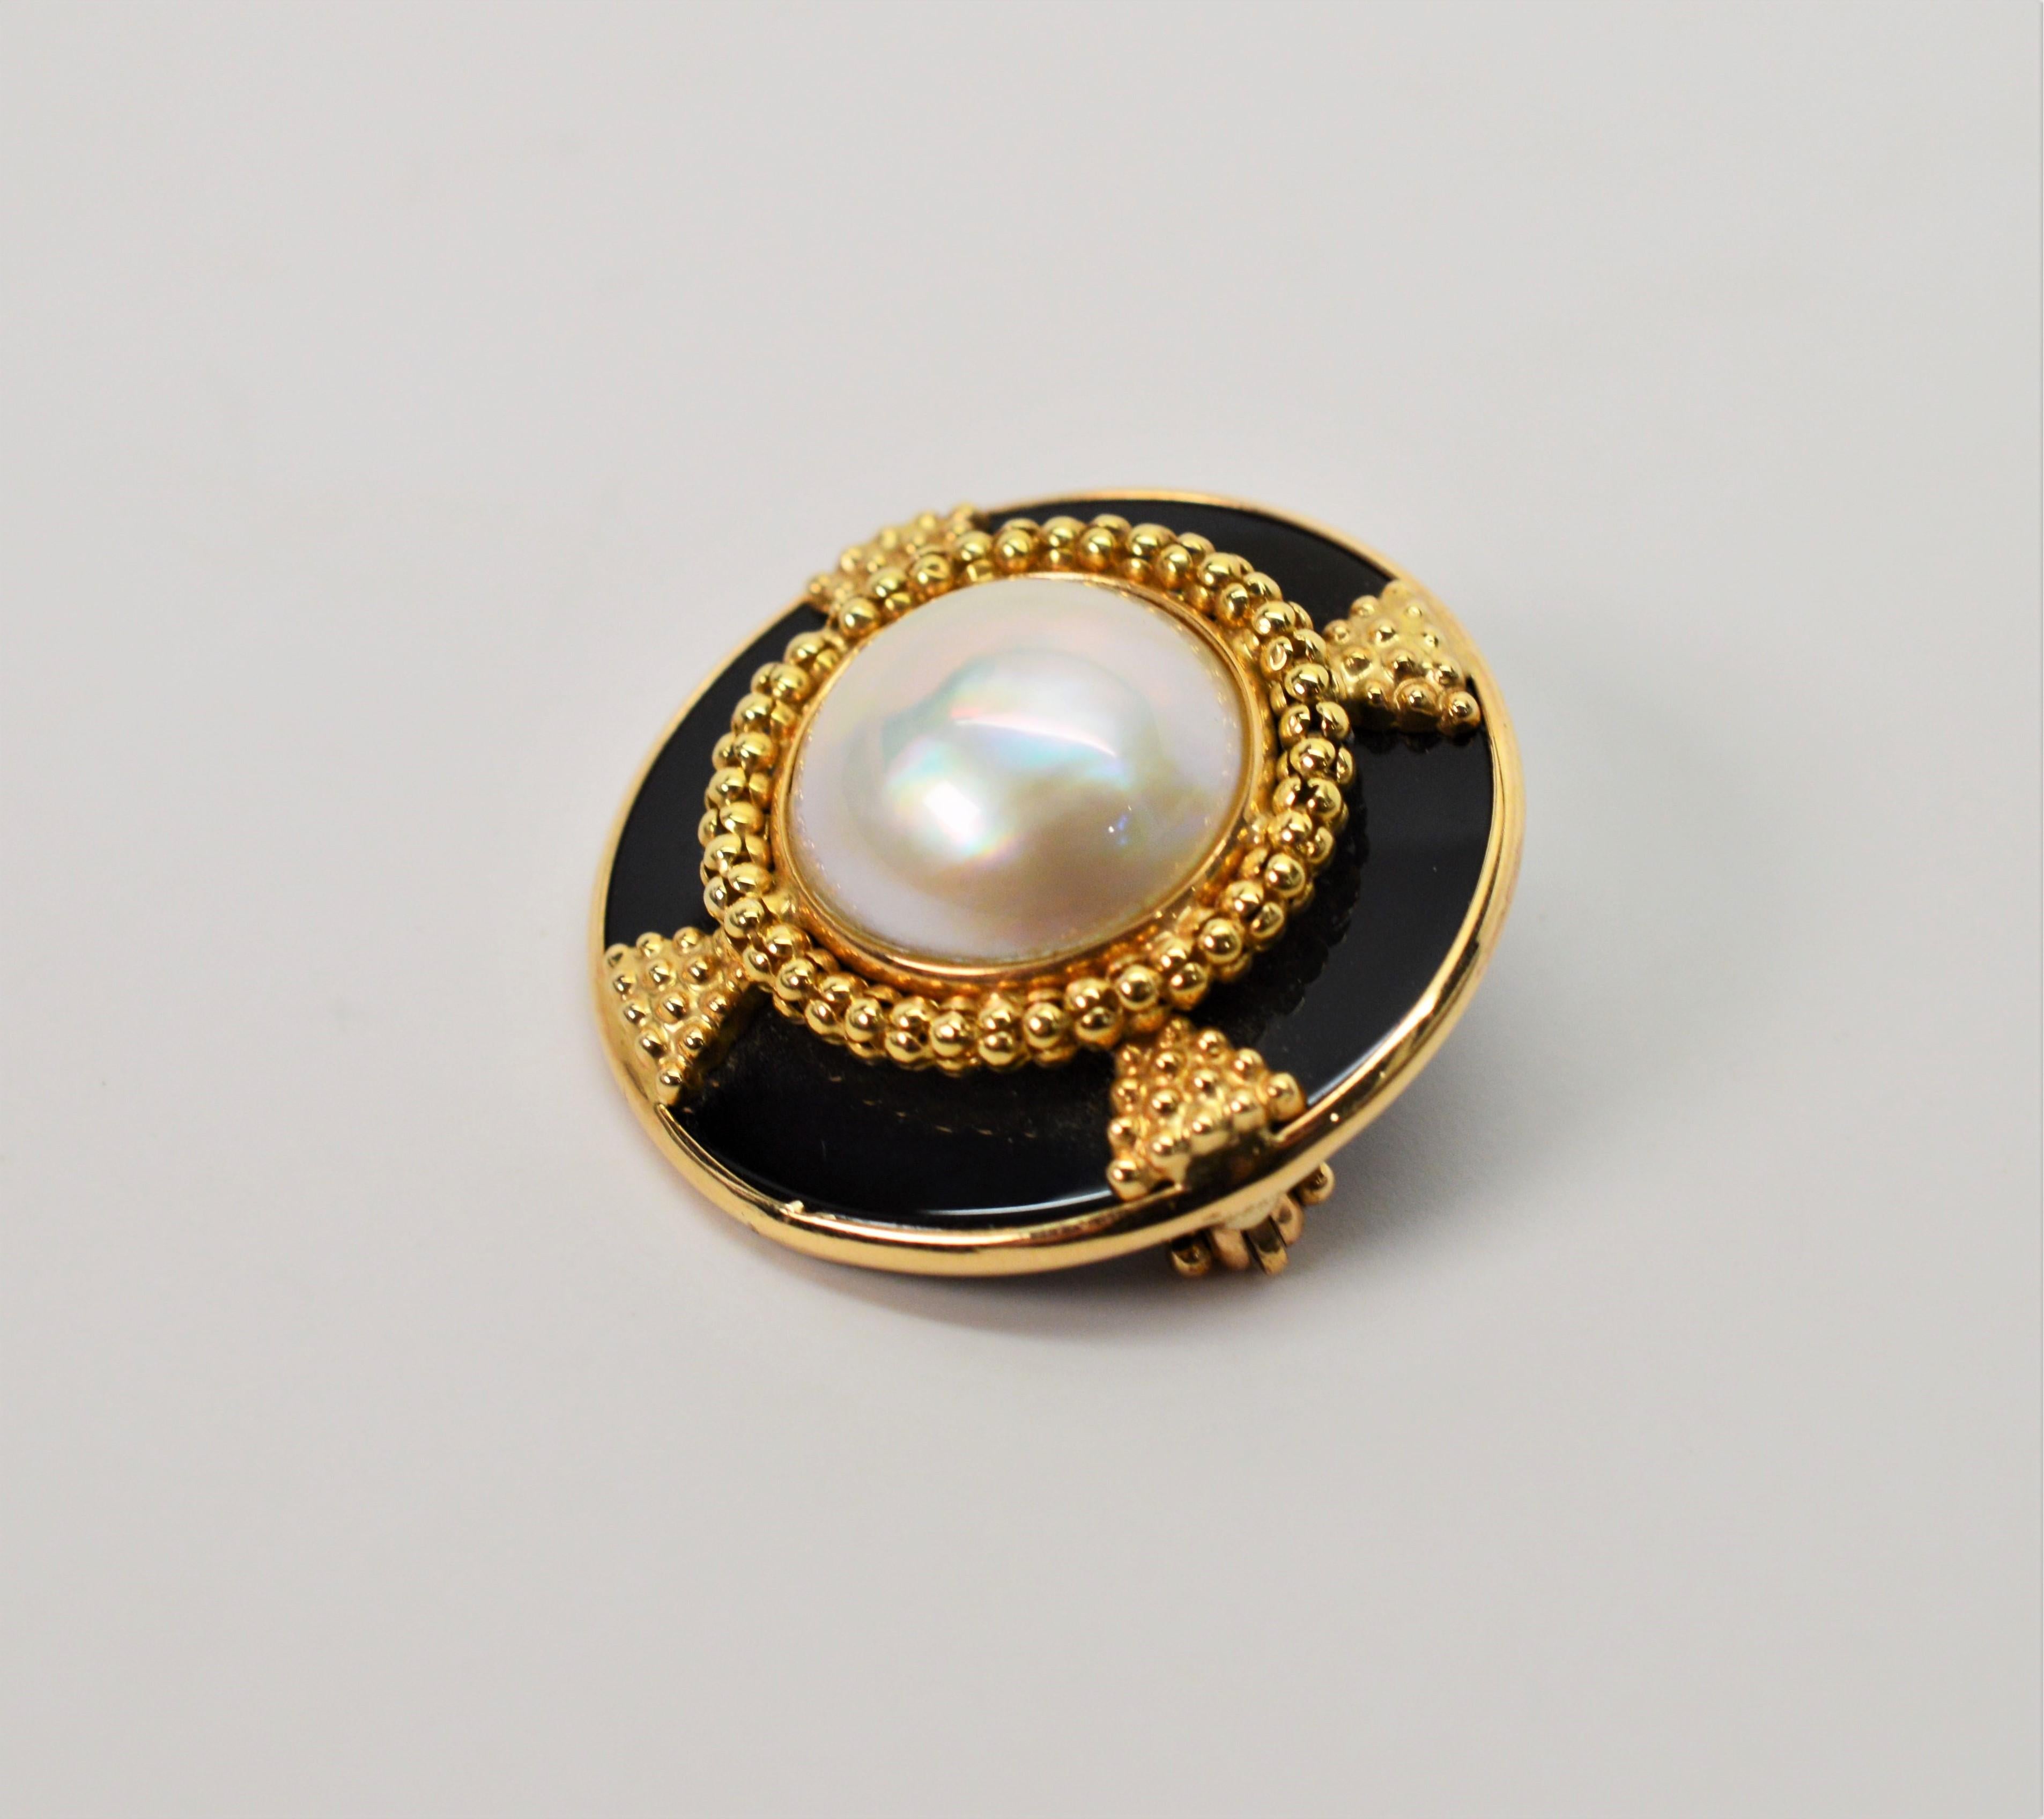 Women's Pearl and Onyx Yellow Gold Emblem Brooch